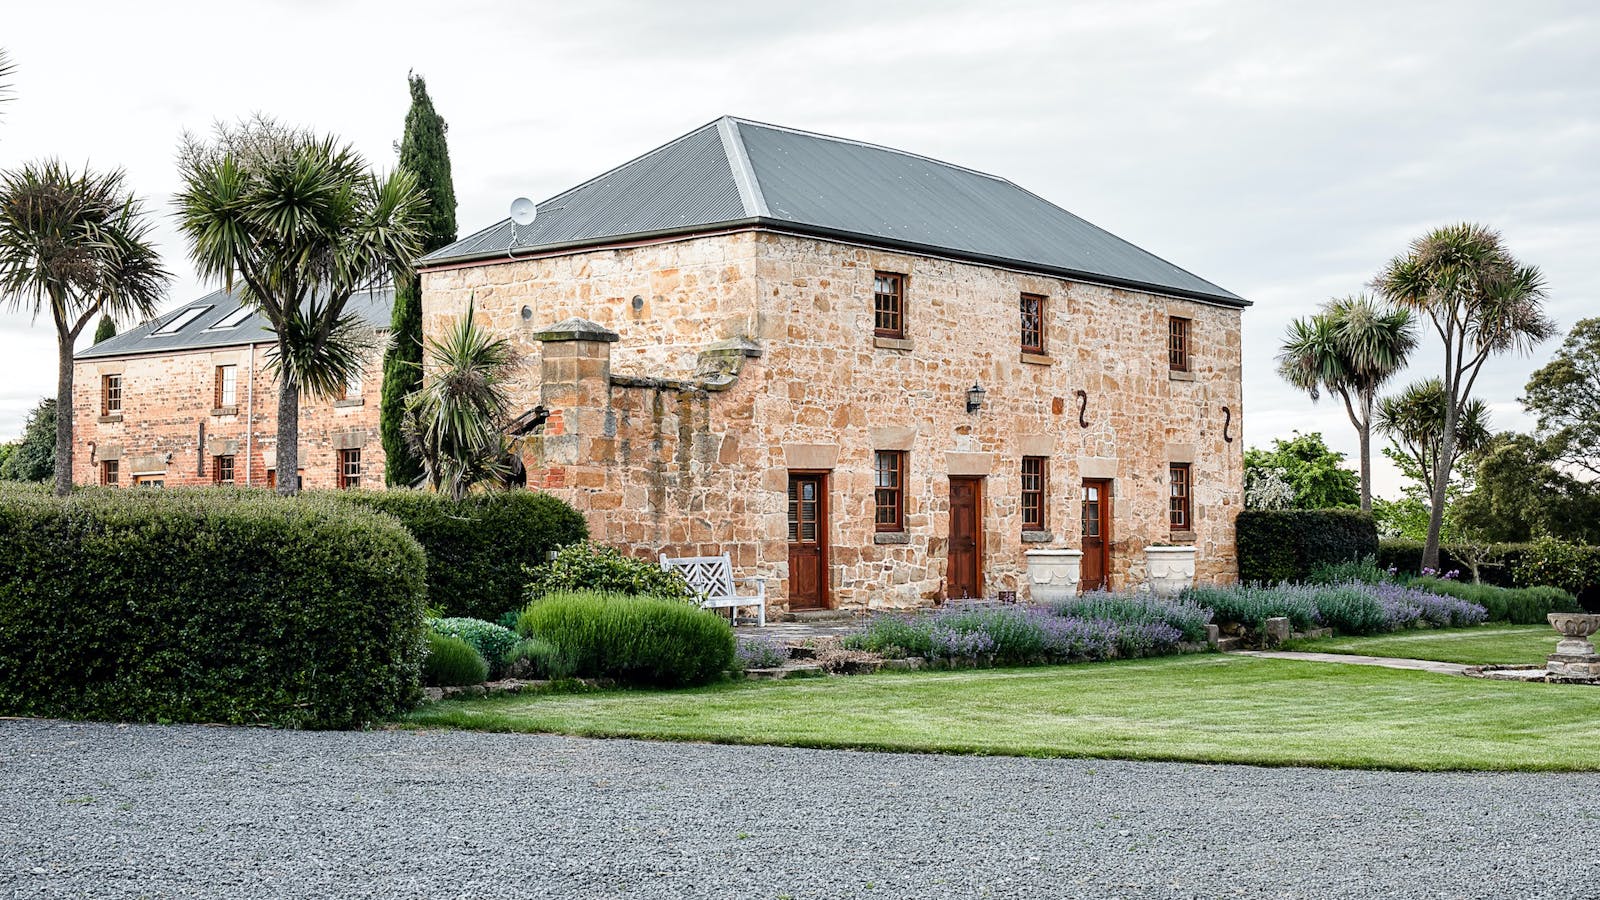 This former Granary (c1820s) is now luxury accommodation.